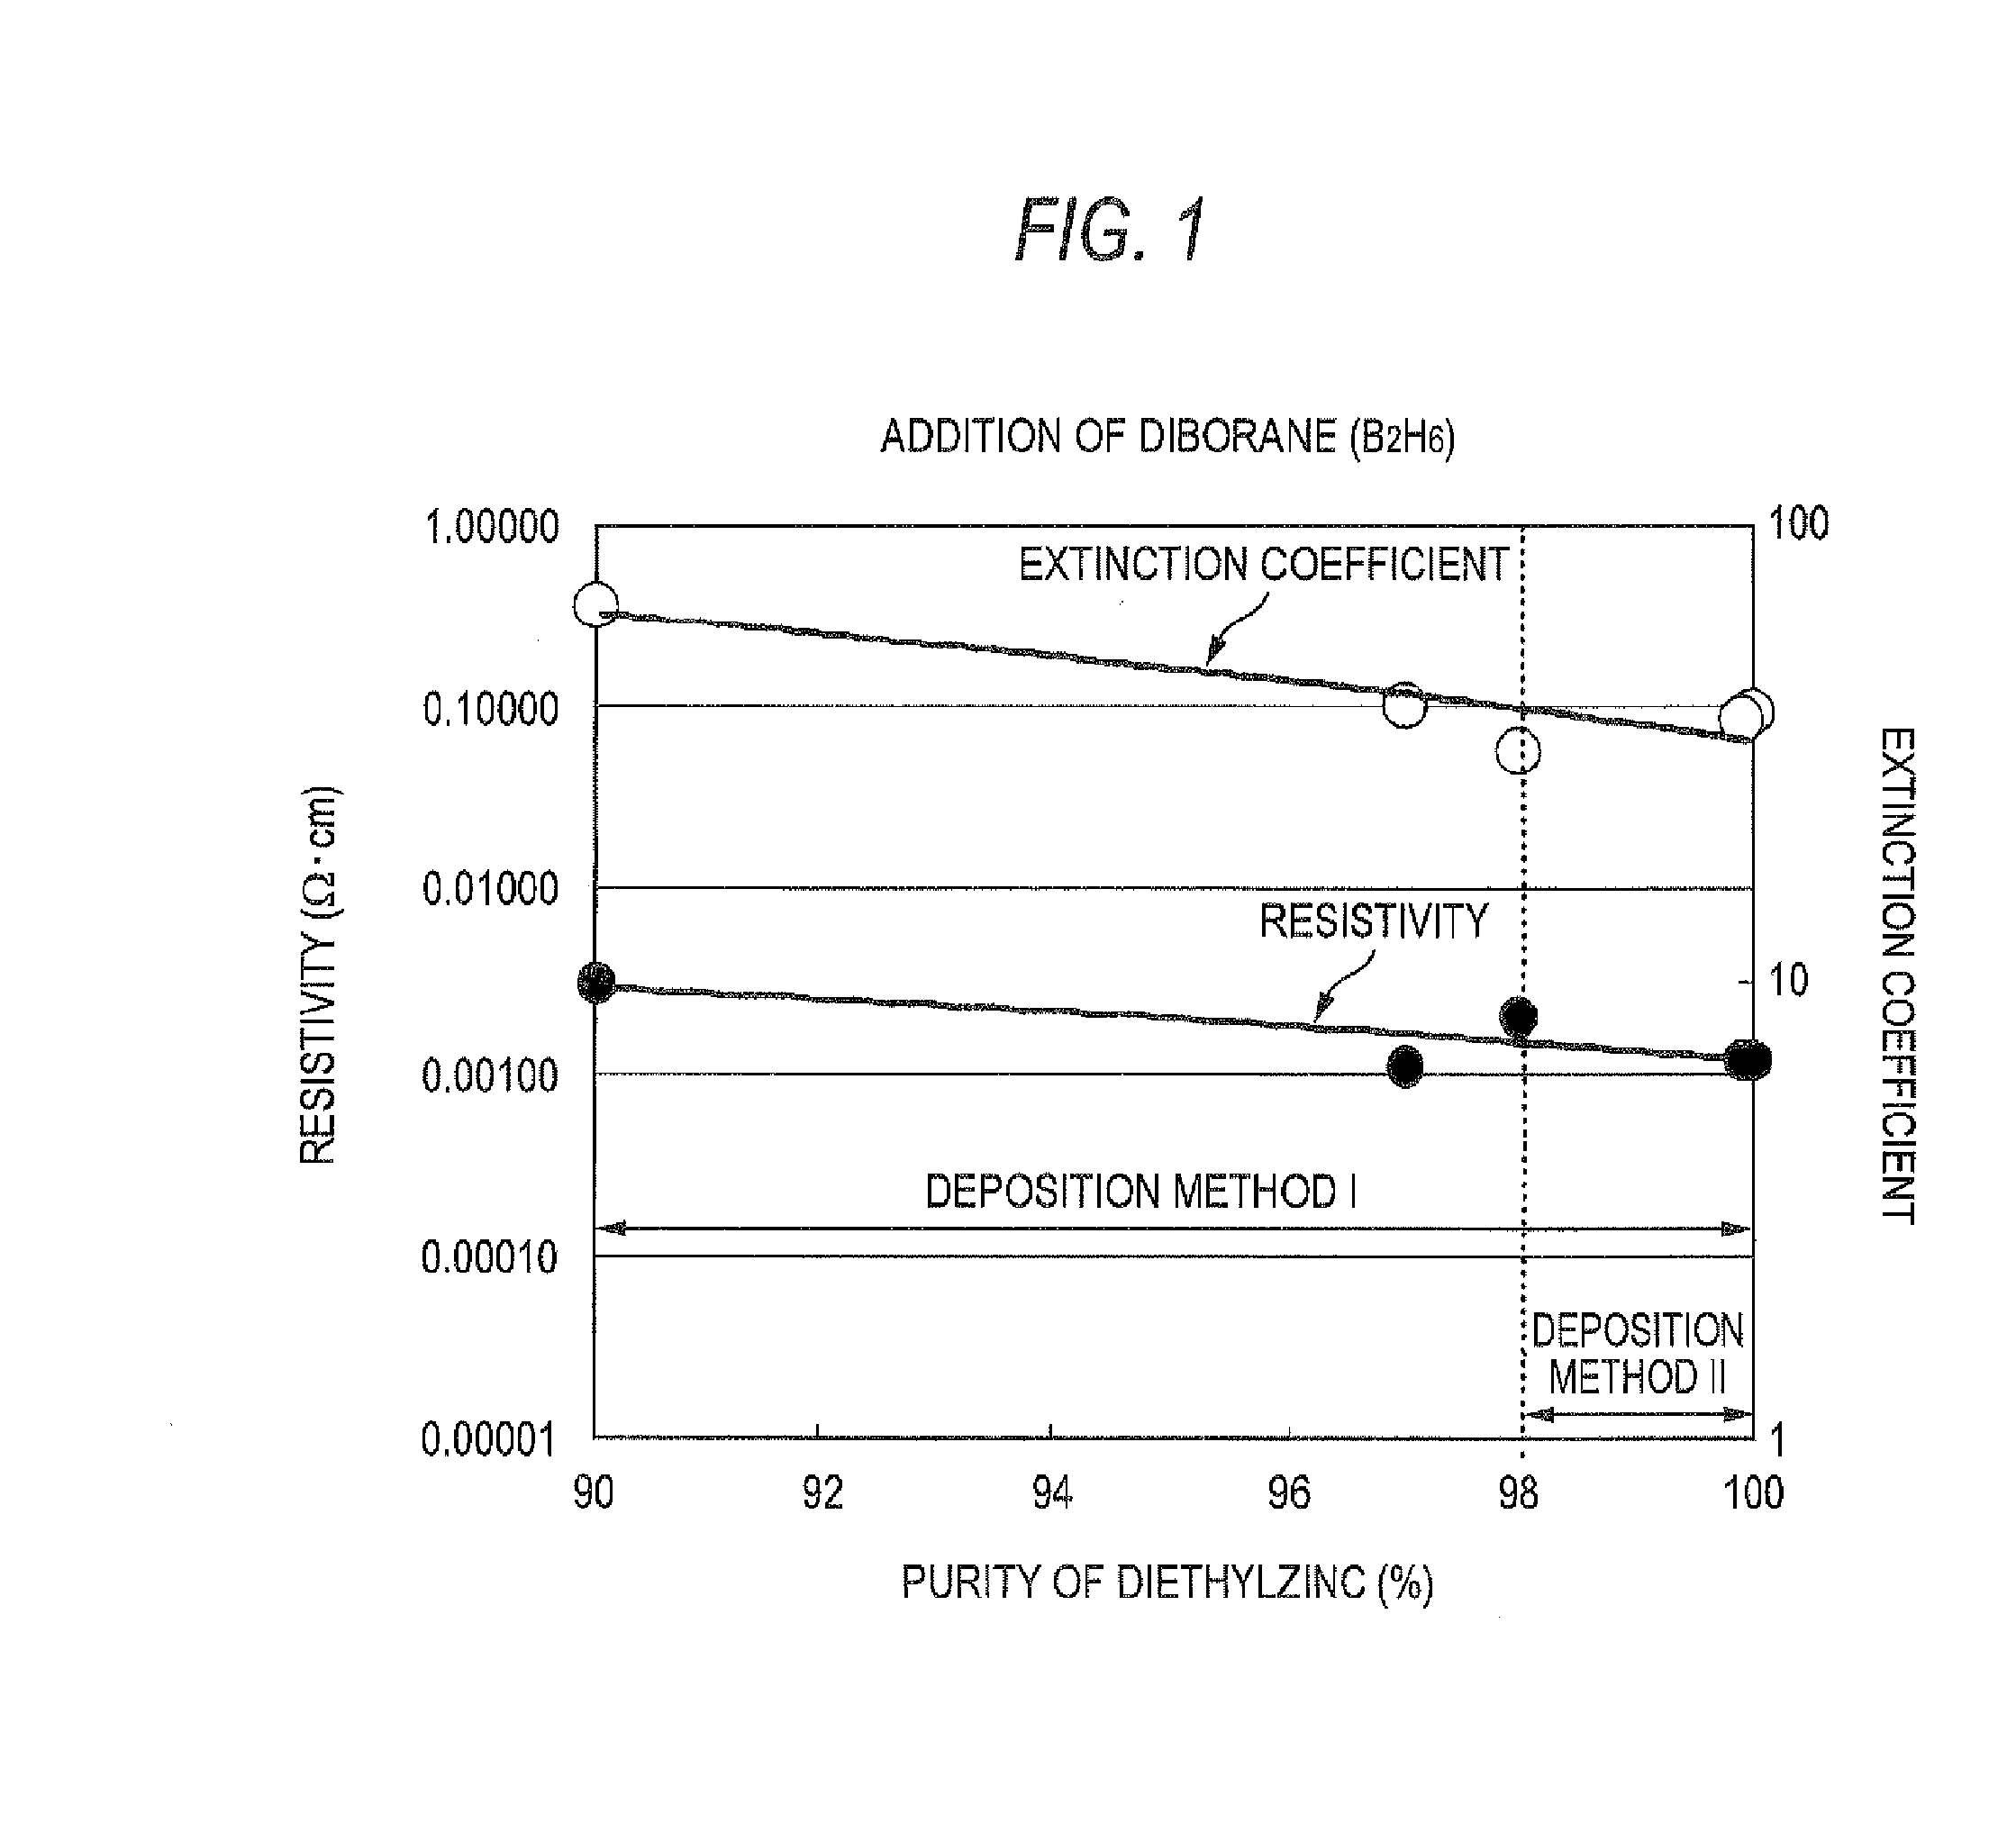 Process For Producing Zno Transparent Conductive Film By Mocvd (Metal-Organic Chemical Vapor Deposition) Method